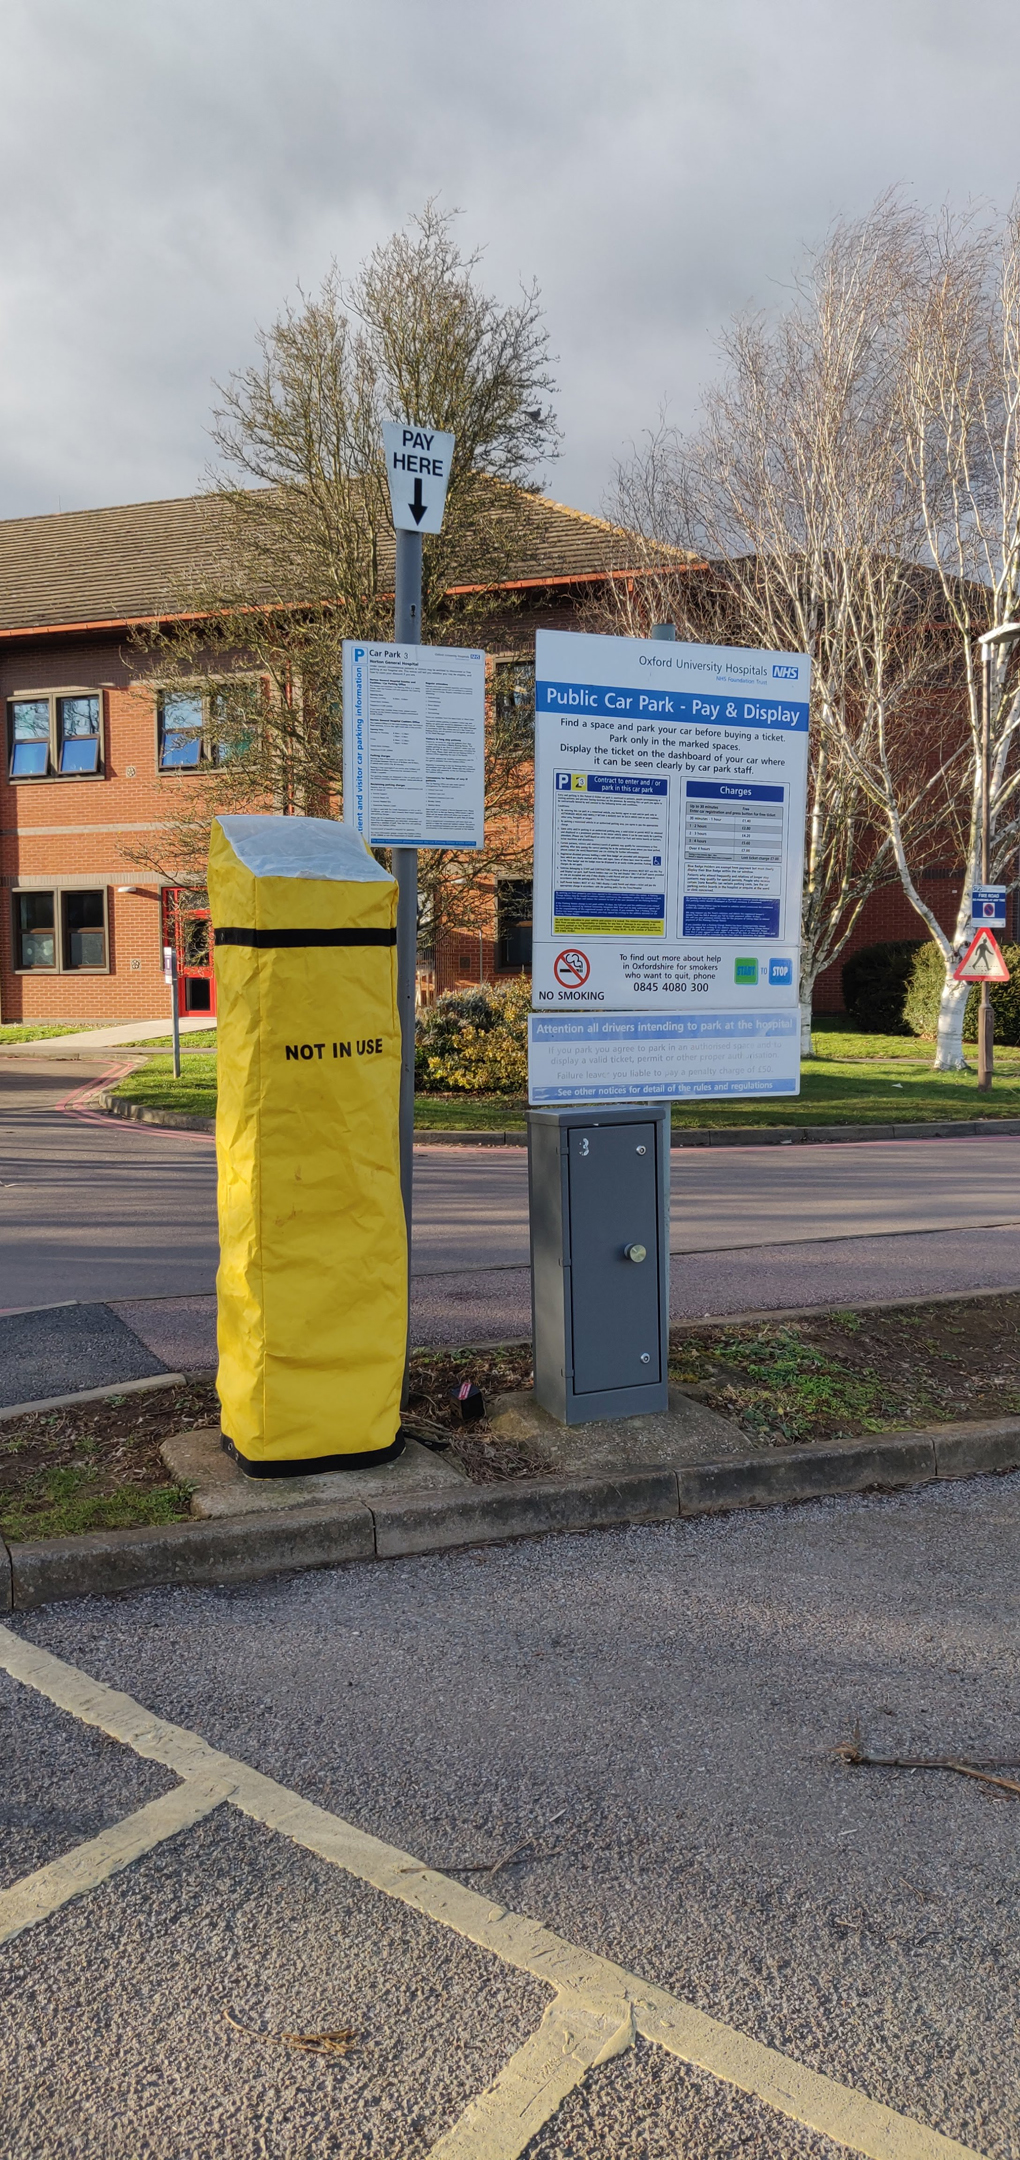 Photo of a parking meter with a yellow 